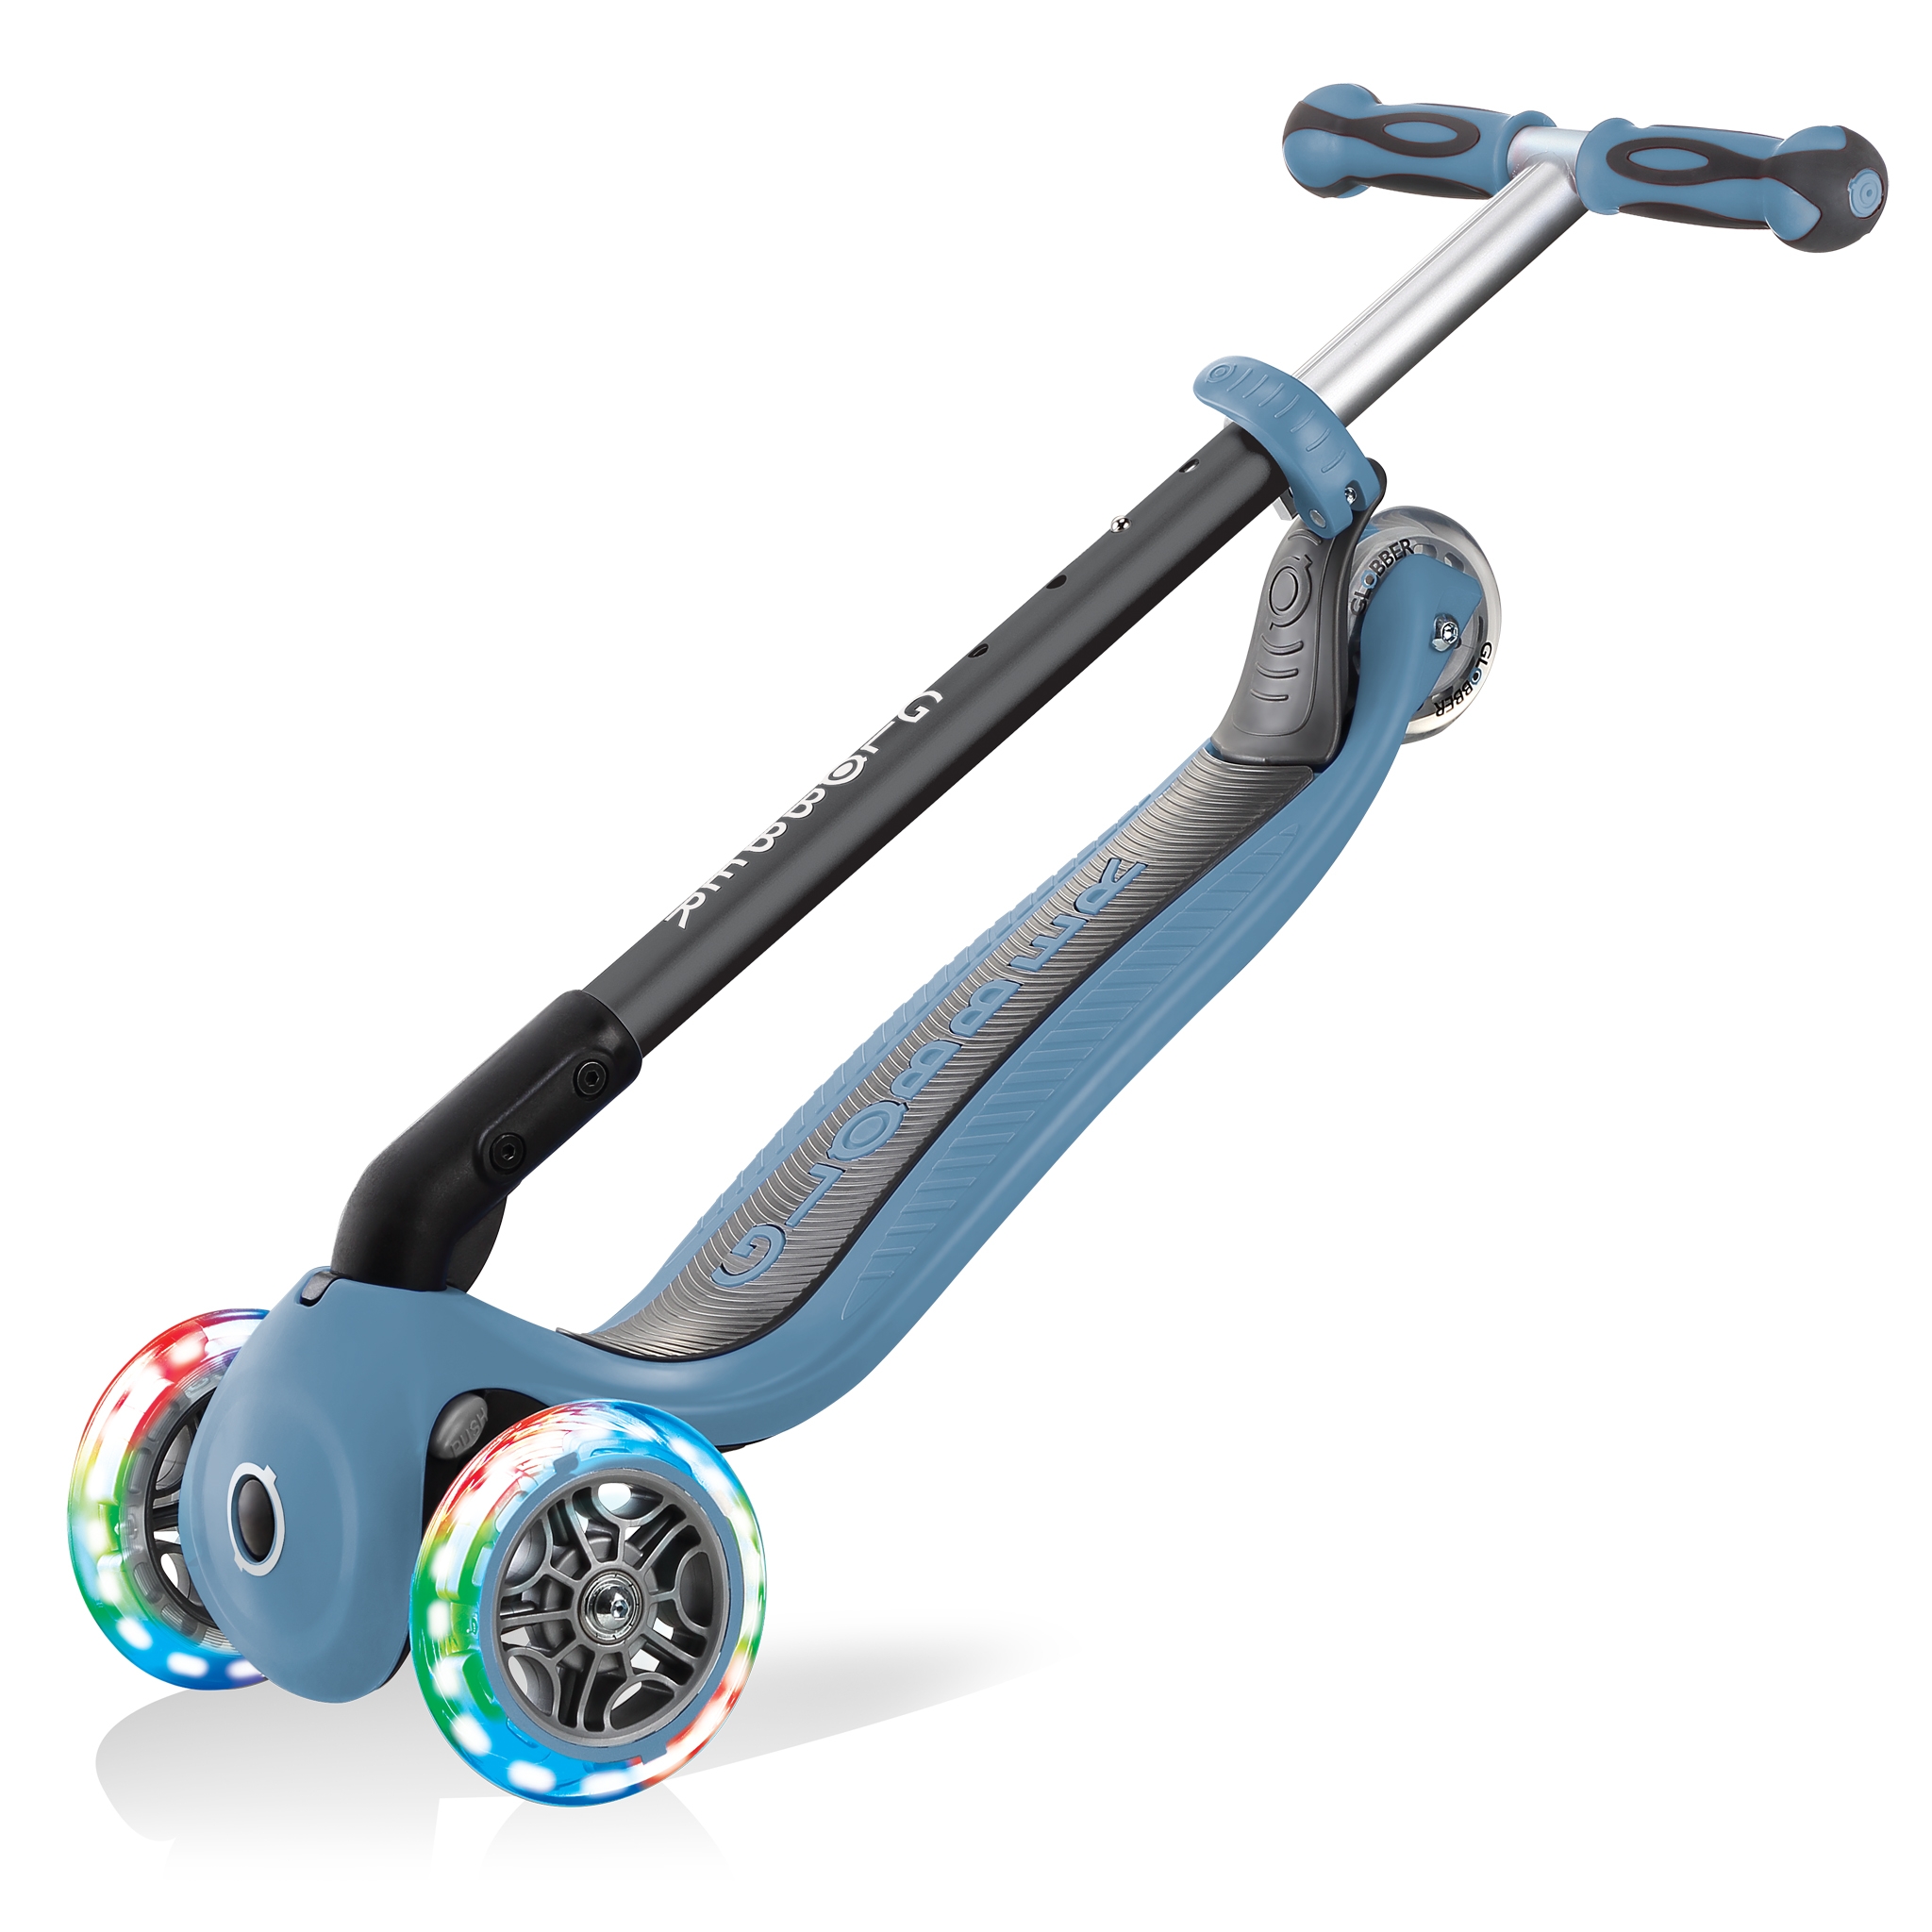 GO-UP-DELUXE-LIGHTS-ride-on-walking-bike-scooter-with-light-up-wheels-trolley-mode-compatible-ash-blue 5